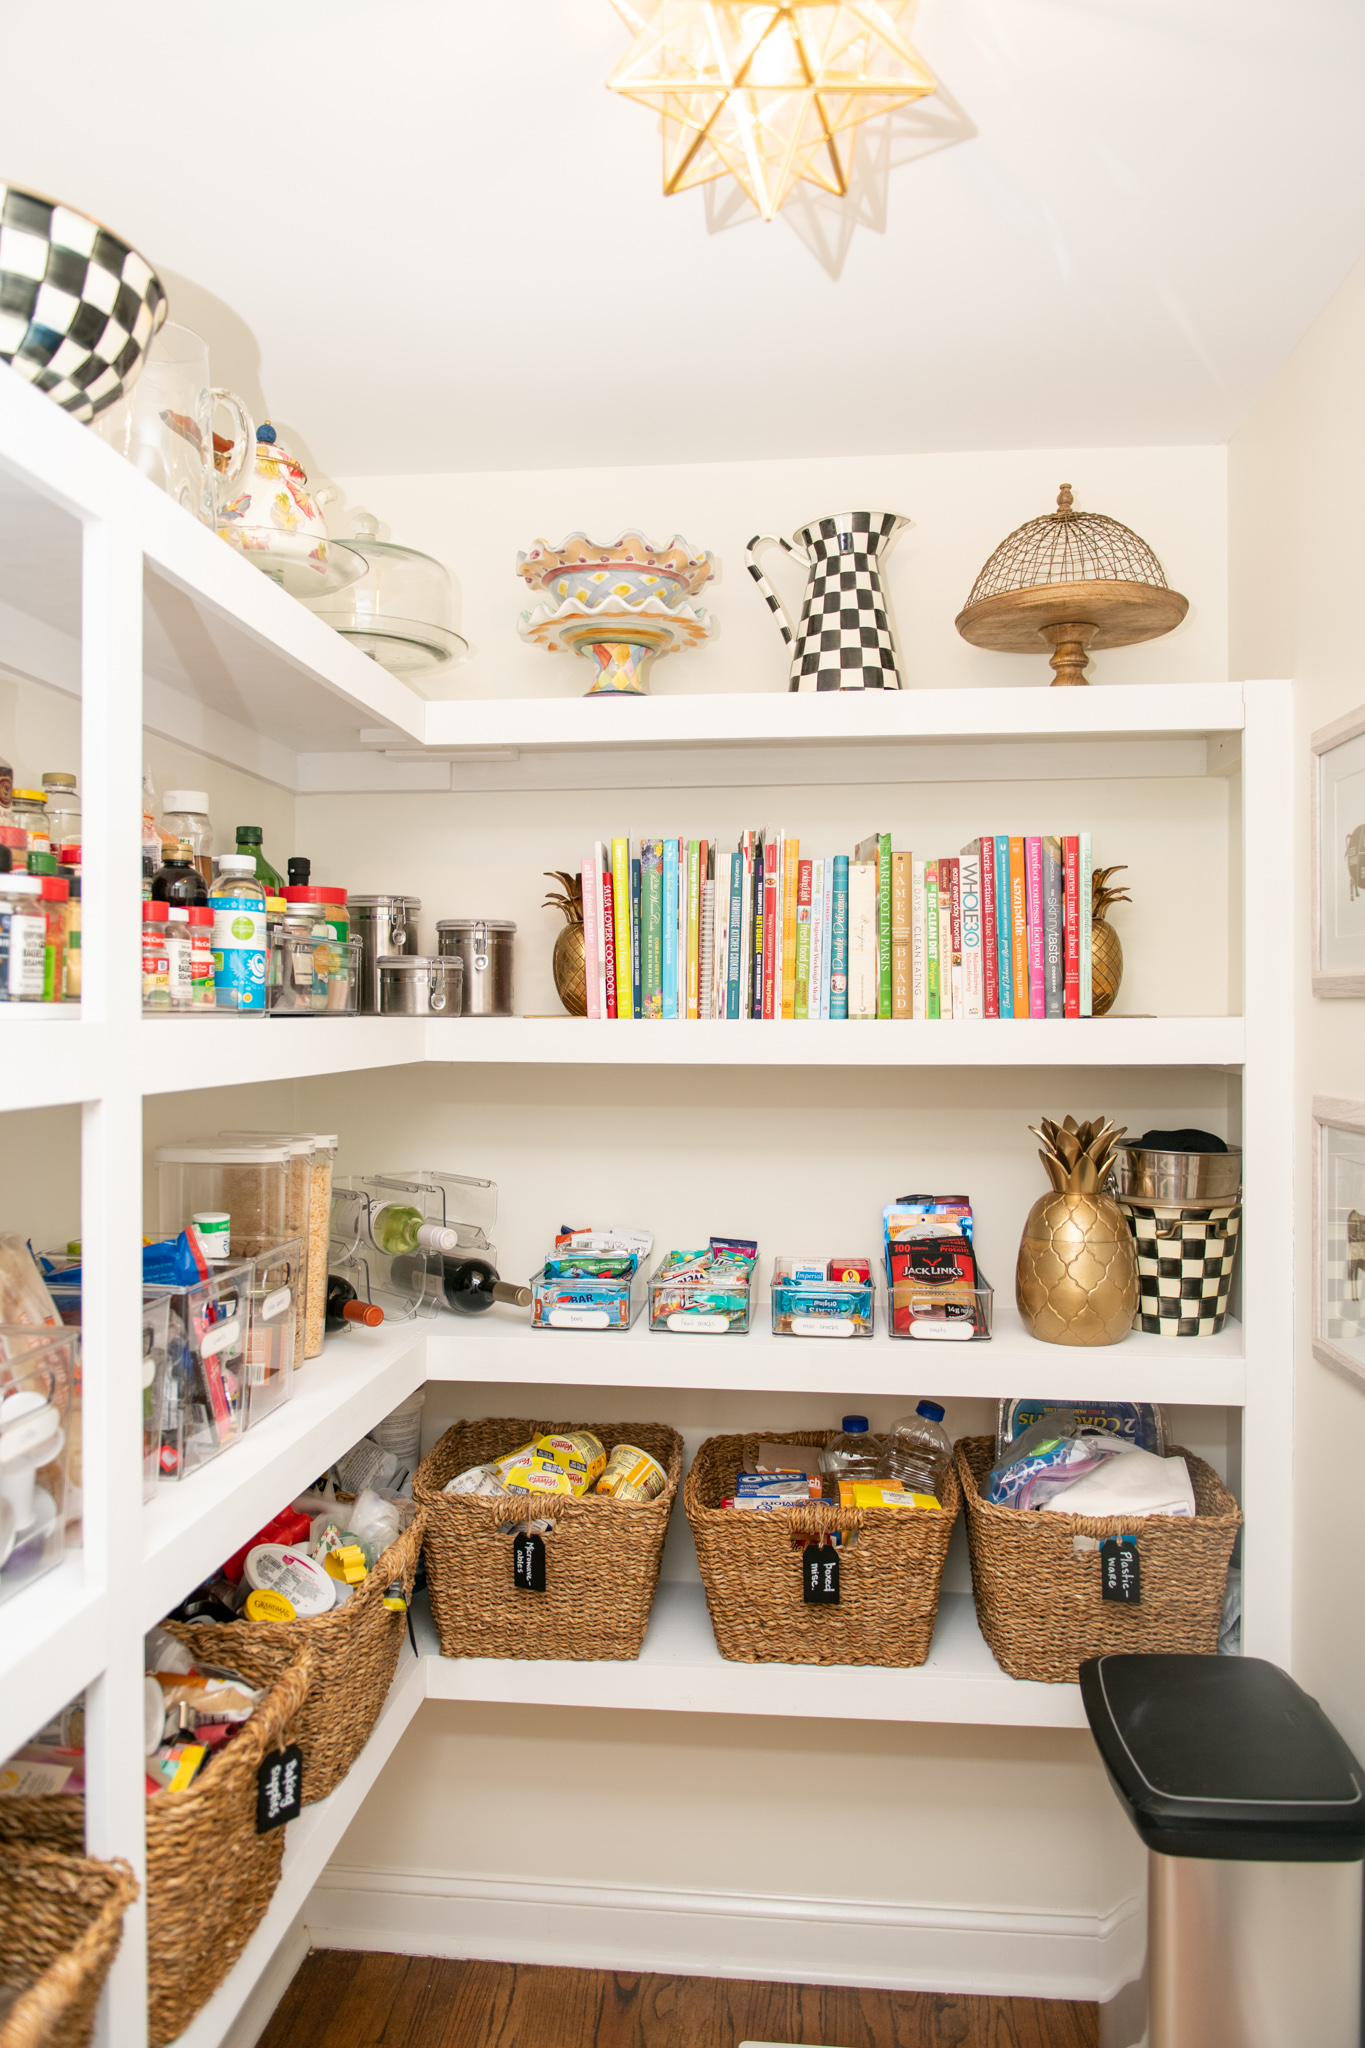 Pantry Organization Hacks by popular Ohio lifestyle blog, Coffee Beans and Bobby Pins: image of an organized pantry with a Amazon JONATHAN Y JYL9035B Stella 9.75" Moravian Star Metal/Glass Flush Mount, Amazon mDesign Plastic Kitchen Pantry Cabinet, The Container Store Tapered Hogla Storage Bin with Handles, Amazon nuLOOM Rigo Hand Woven Jute Area Rug, and Amazon Copco 2555-0188 Non-Skid 3-Tier Spice Pantry Kitchen Cabinet Organizer.